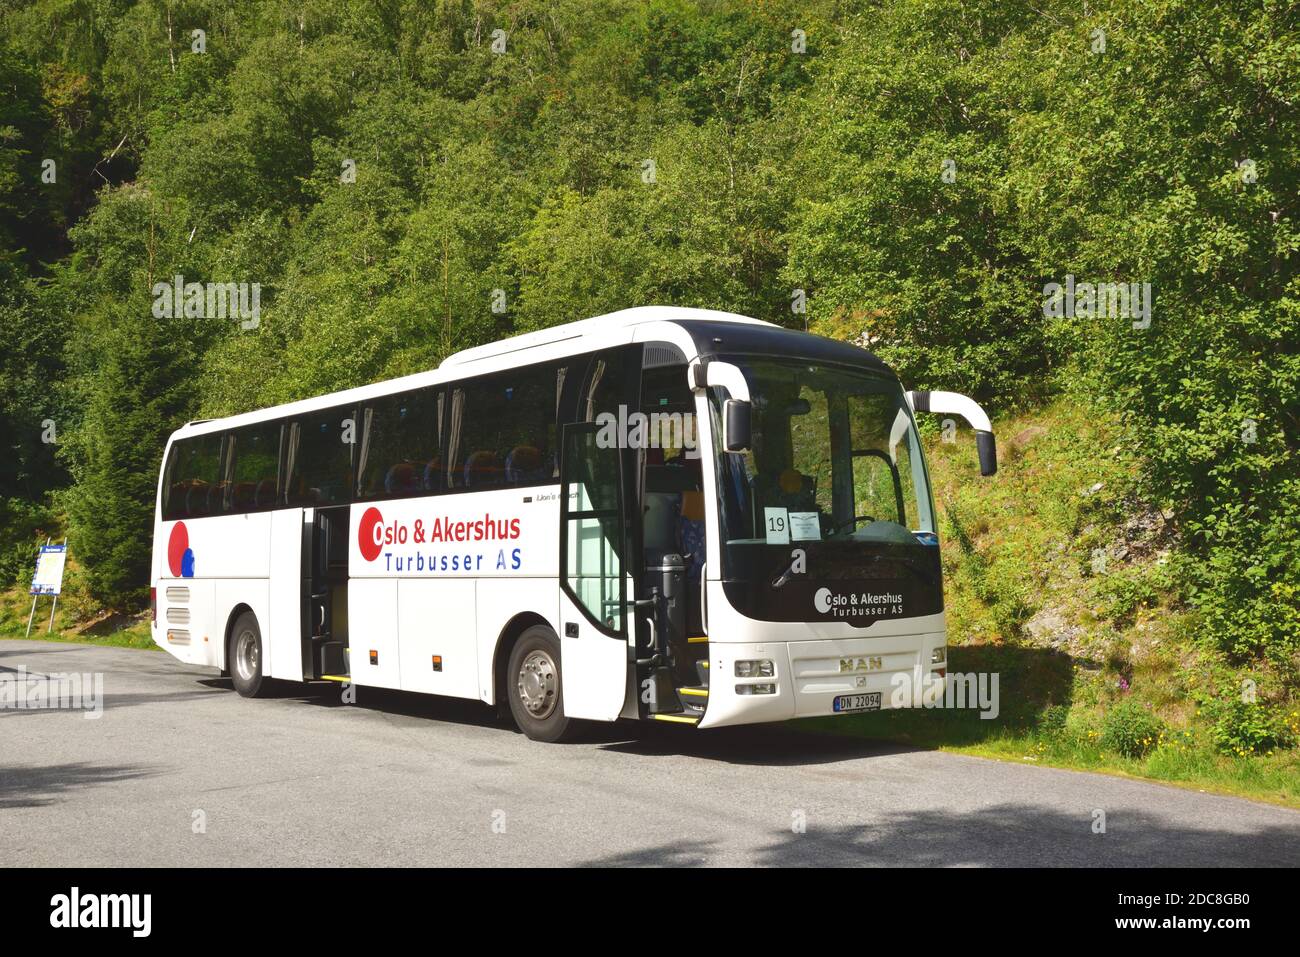 Oslo & Akershus Turbusser AS DN 22094, a MAN R07 Lion's Coach RHC444 on a P  & O Cruises hire, is seen parked at Lake Oldevatnet near Olden, Norway  Stock Photo - Alamy